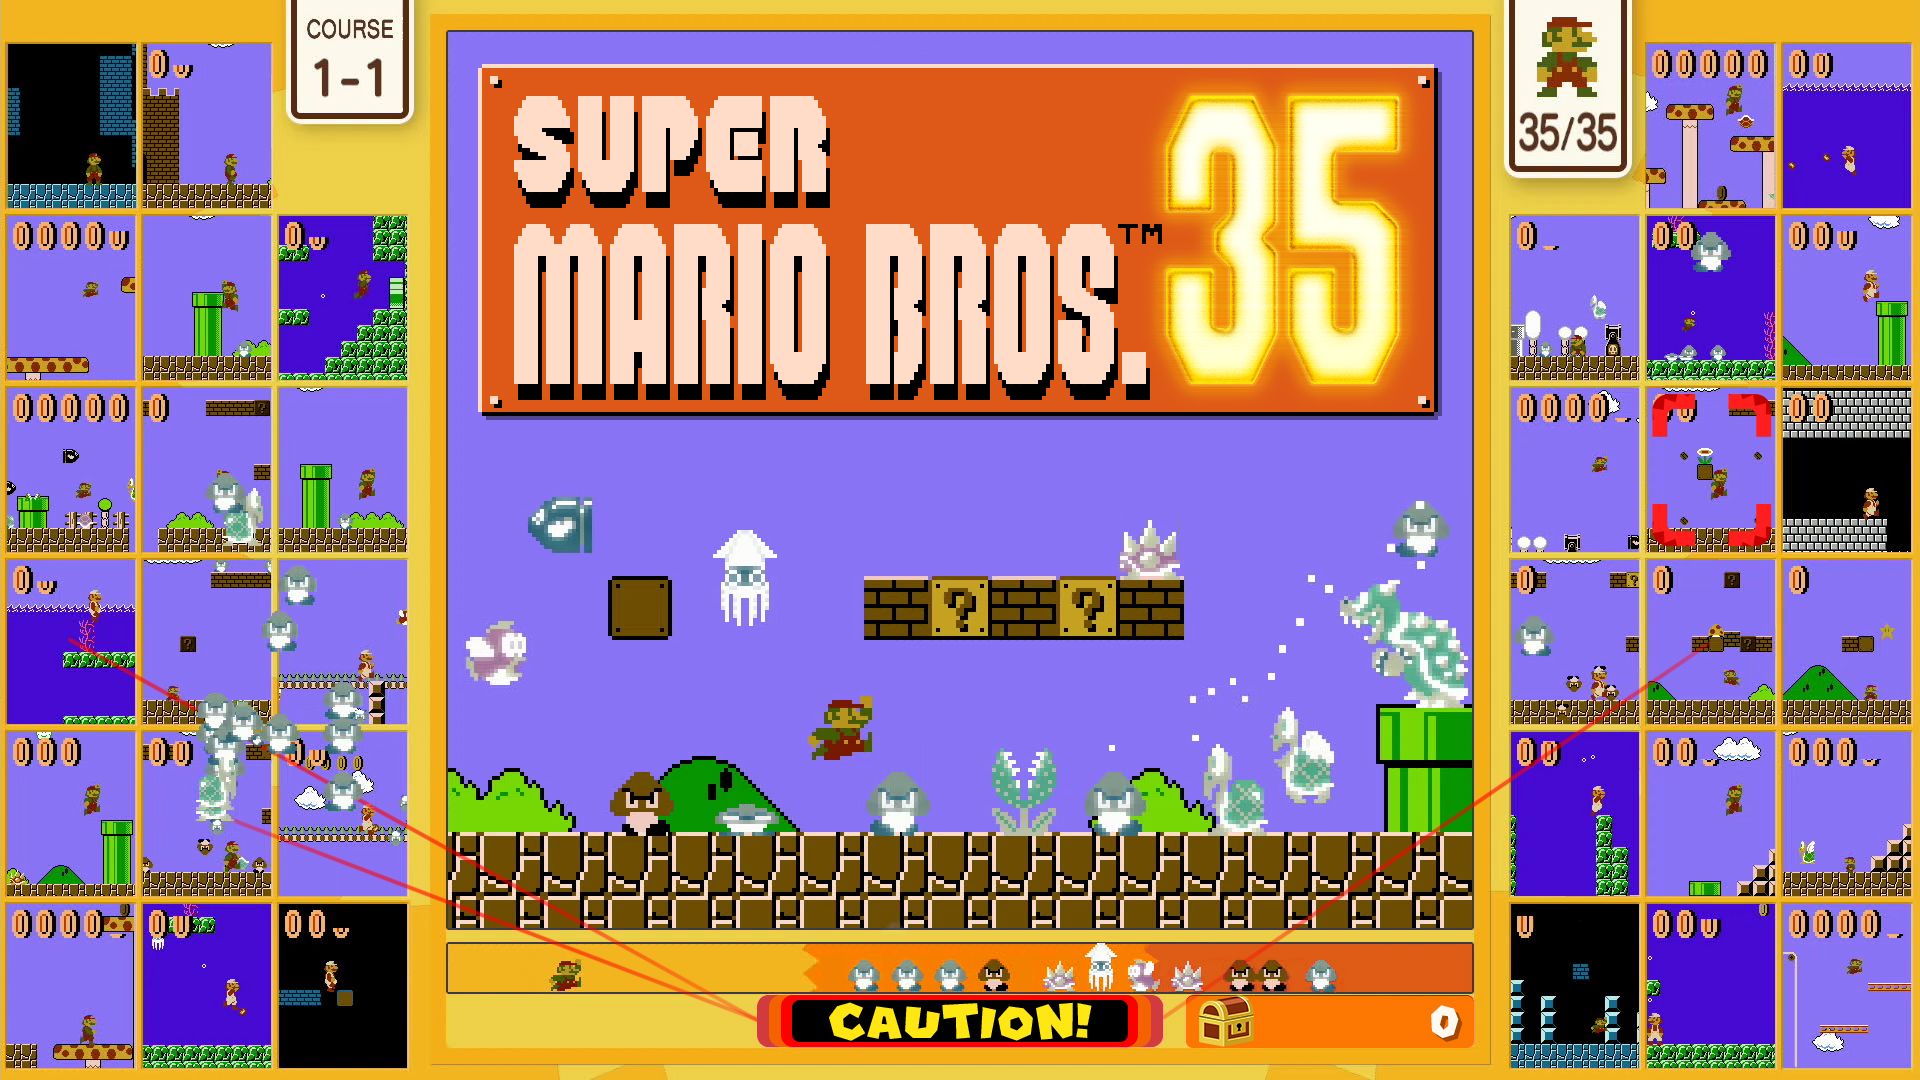 Super Mario Bros. 35 Announced For Nintendo Switch Online, Available October 1st